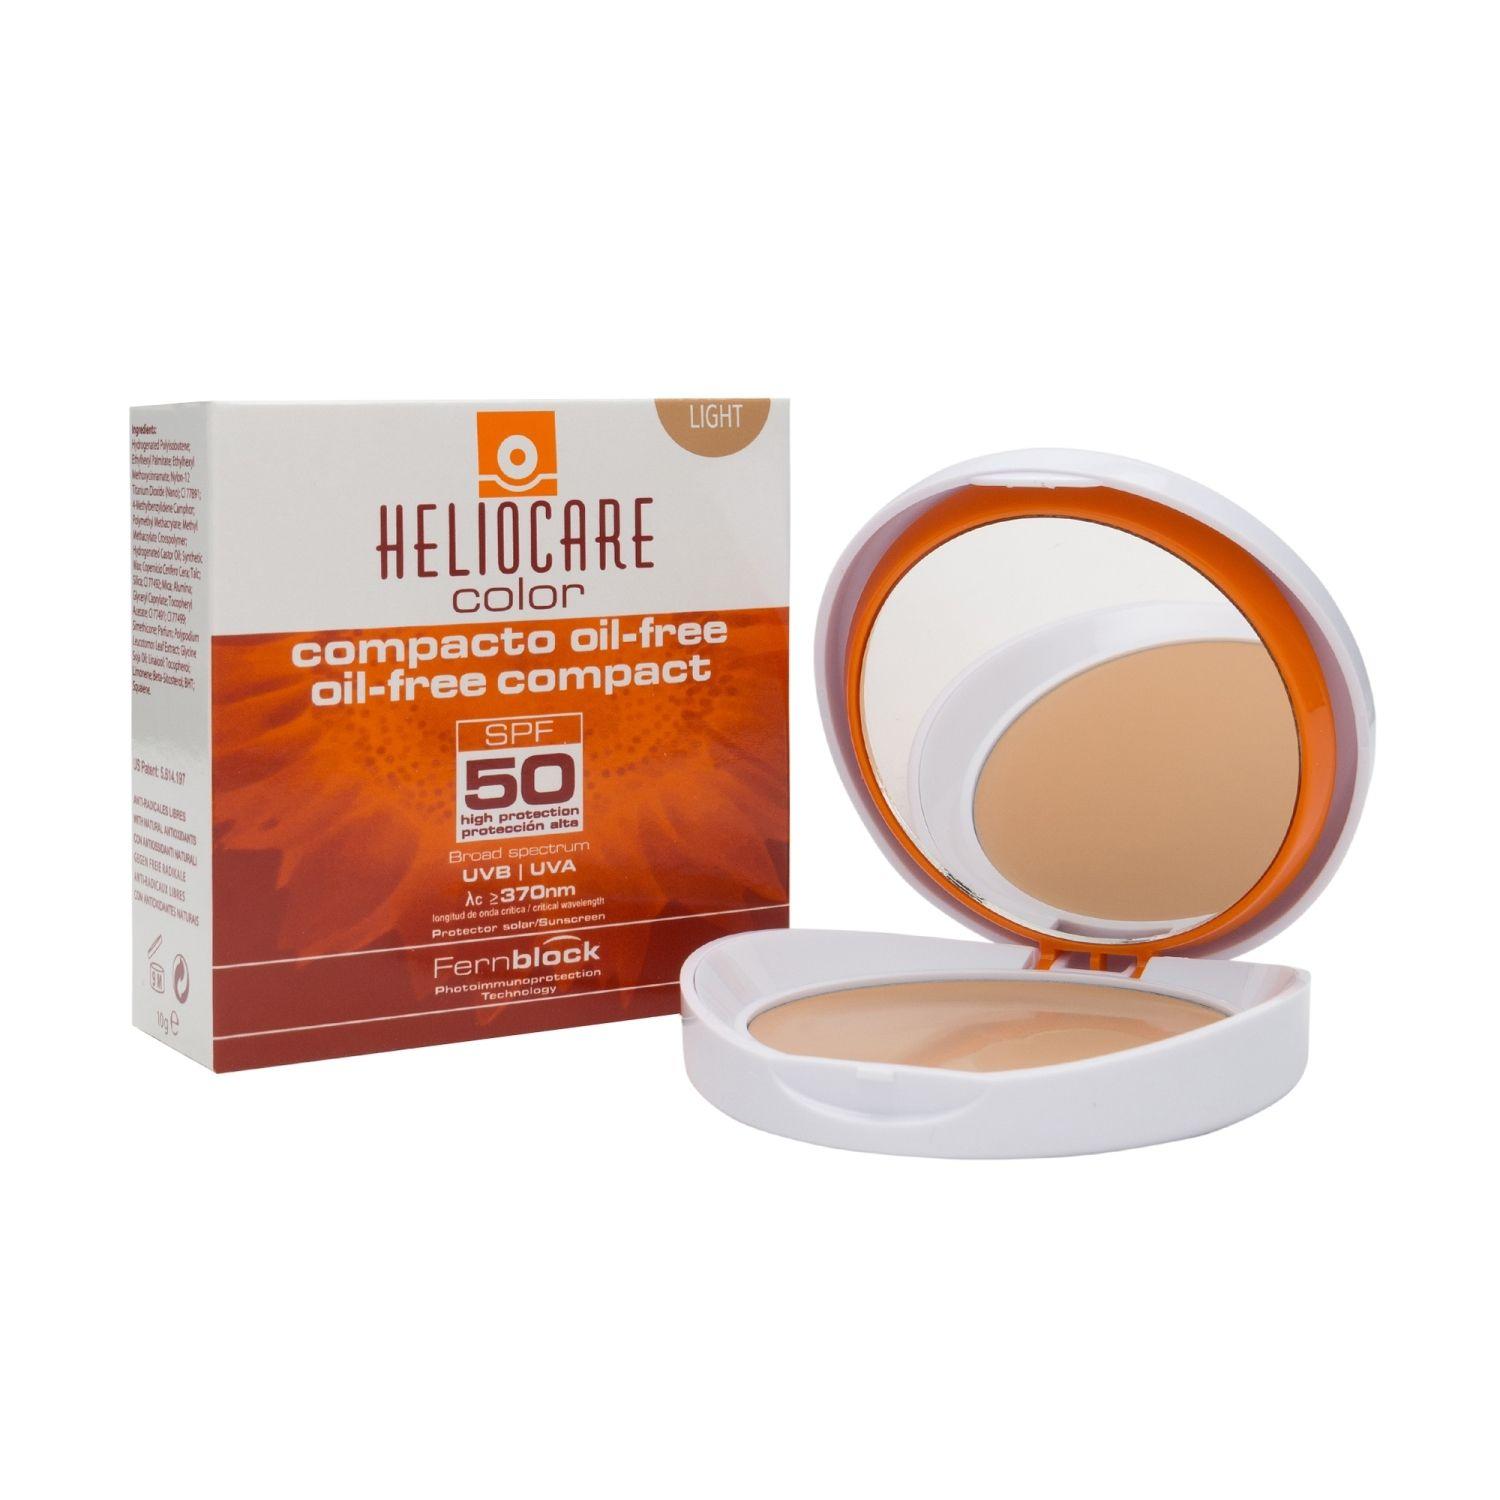 Heliocare color compact spf 50+ oil-free Light 10 gr